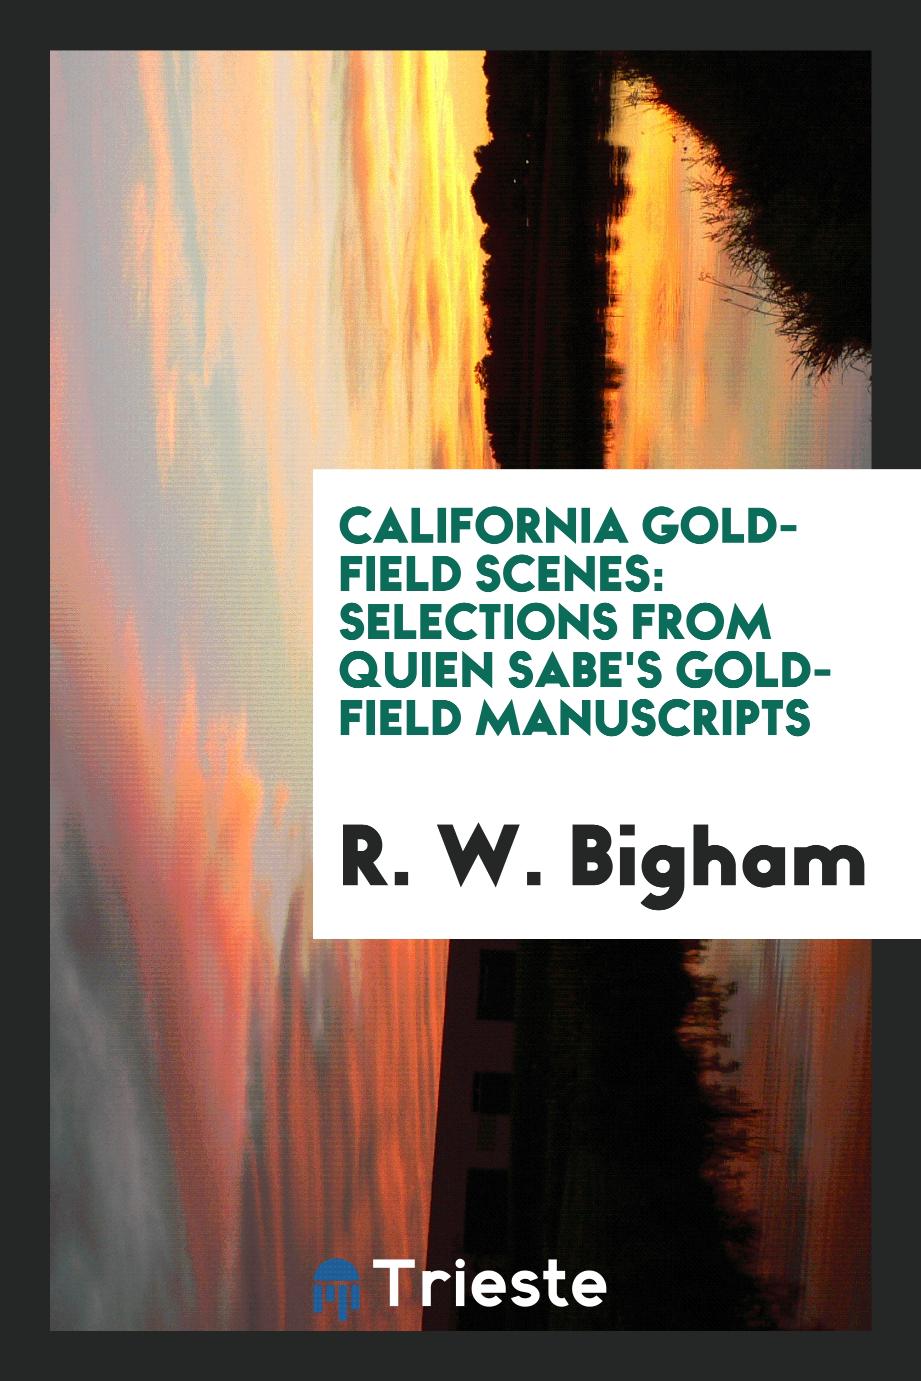 California gold-field scenes: selections from Quien Sabe's gold-field manuscripts